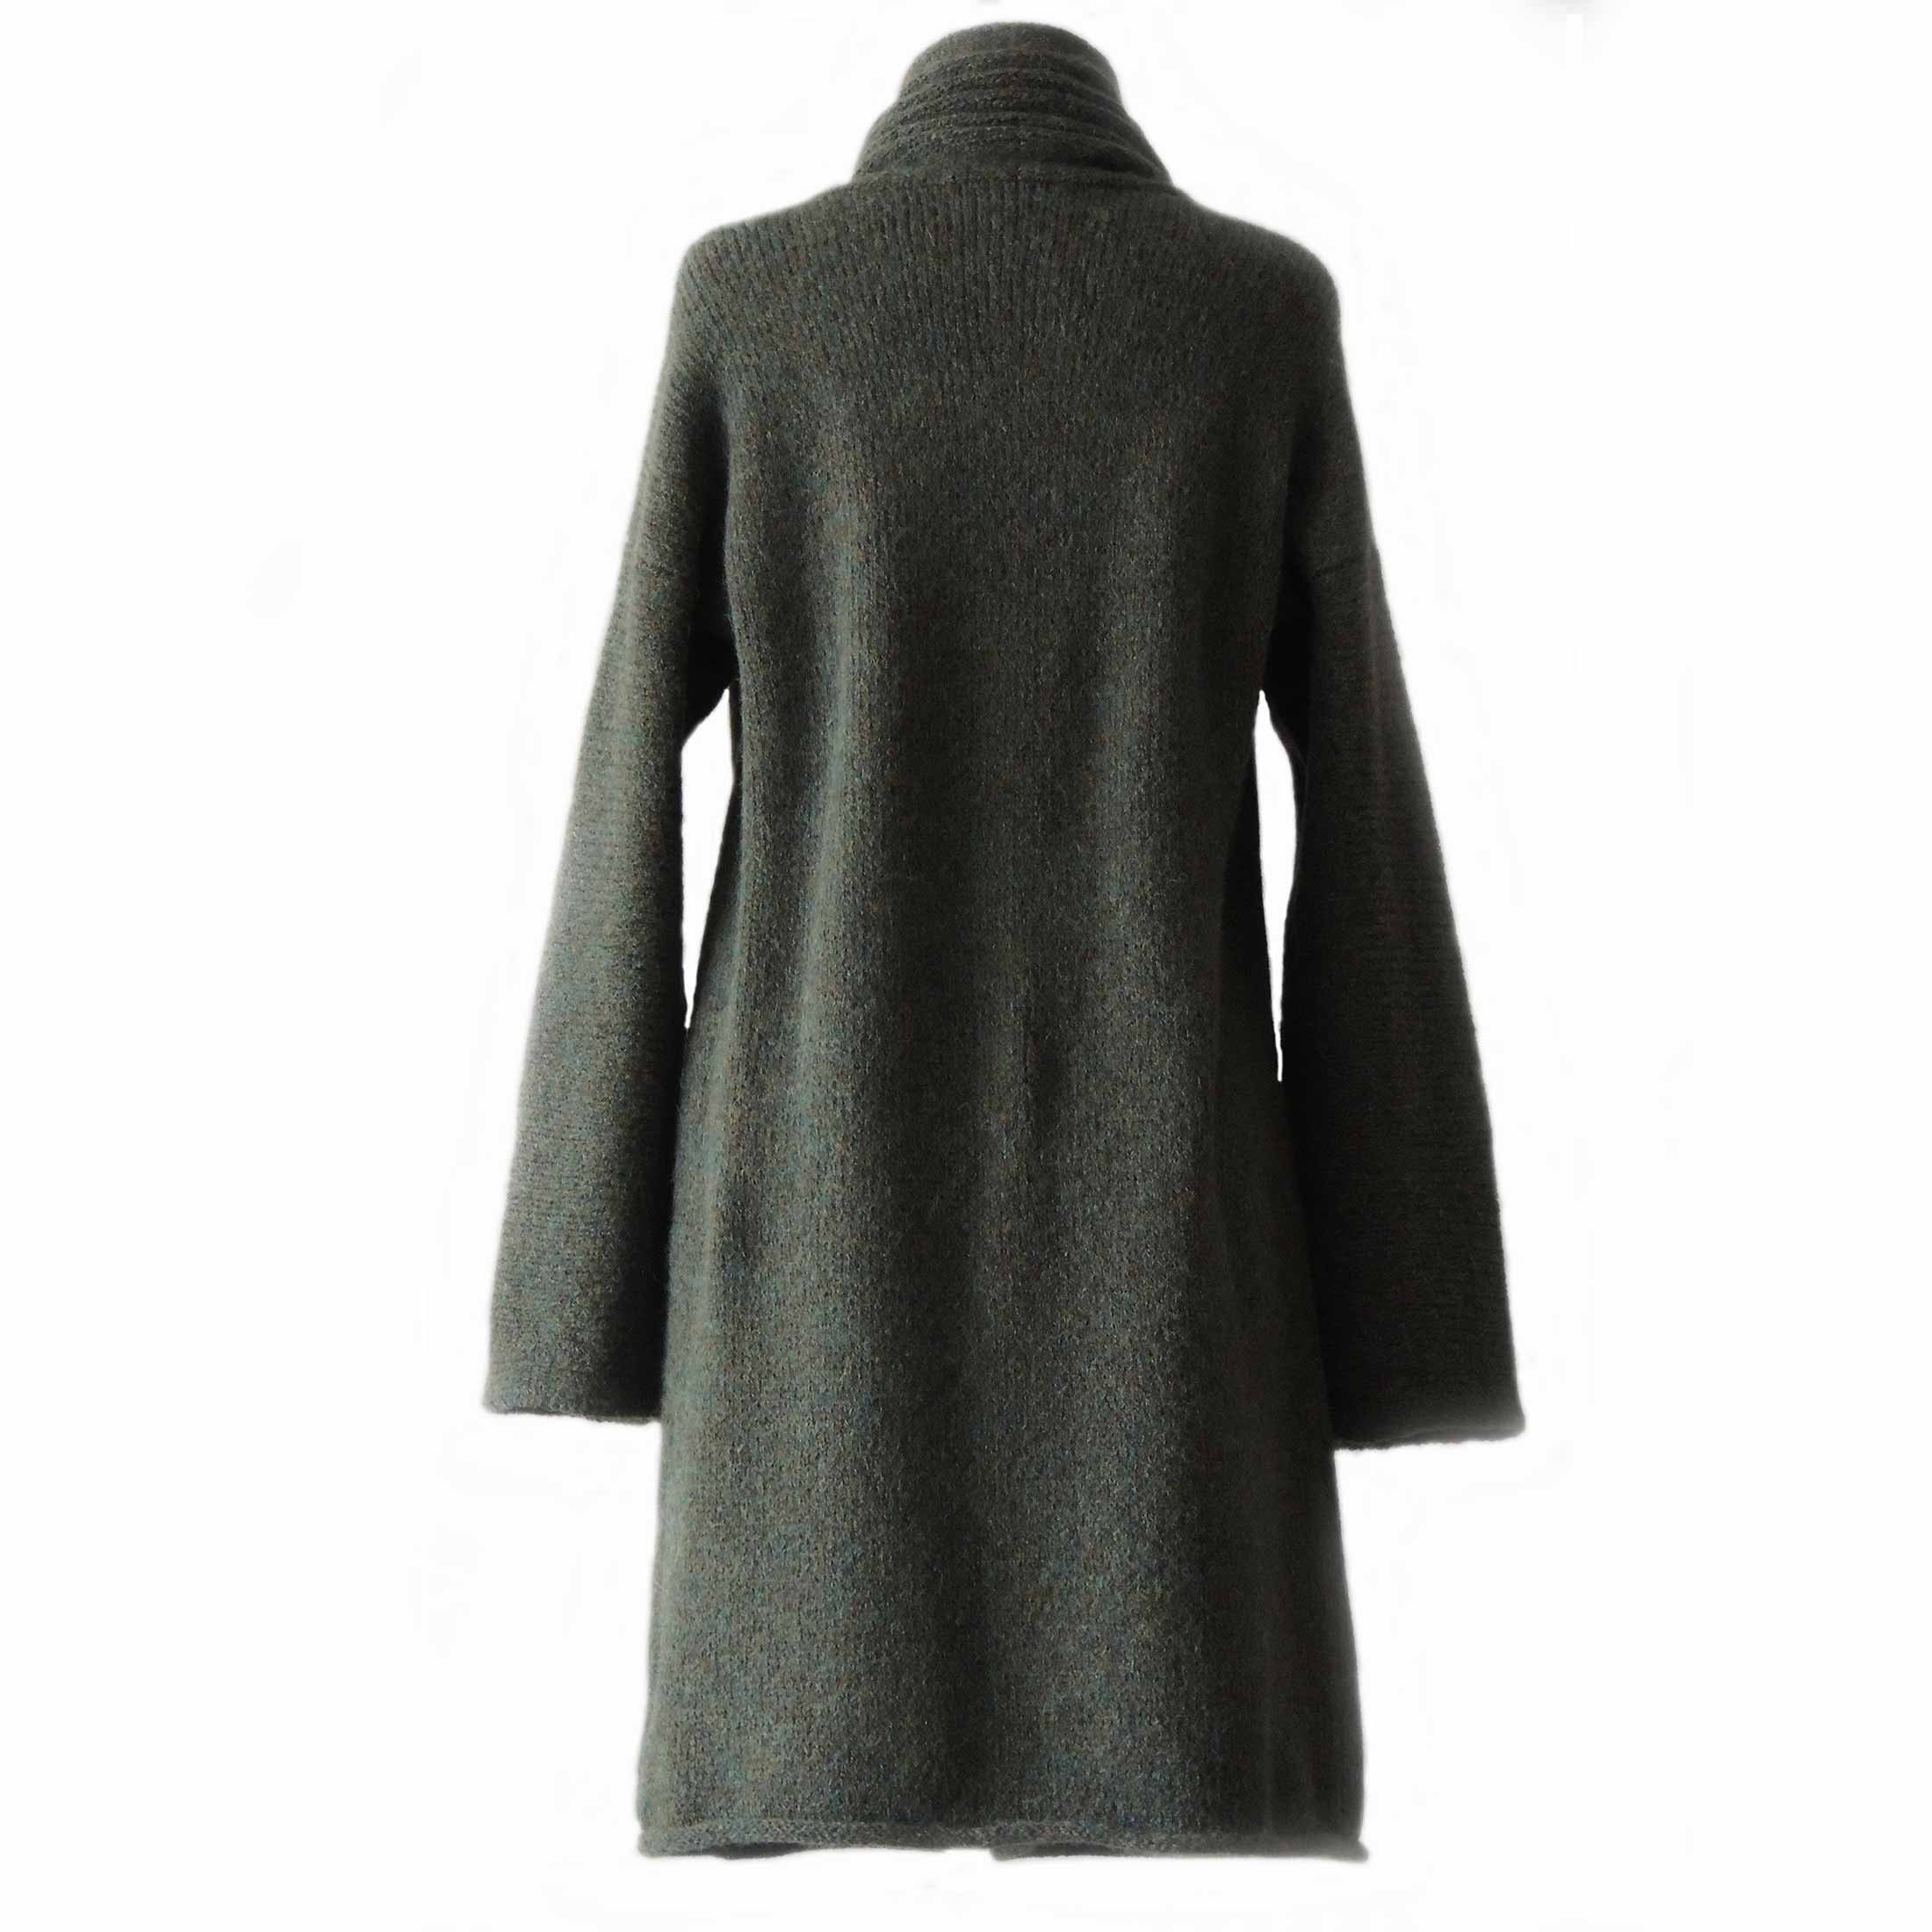 Capote Coat Limited Edition 93% Alpaca Oversized With Belt - Etsy